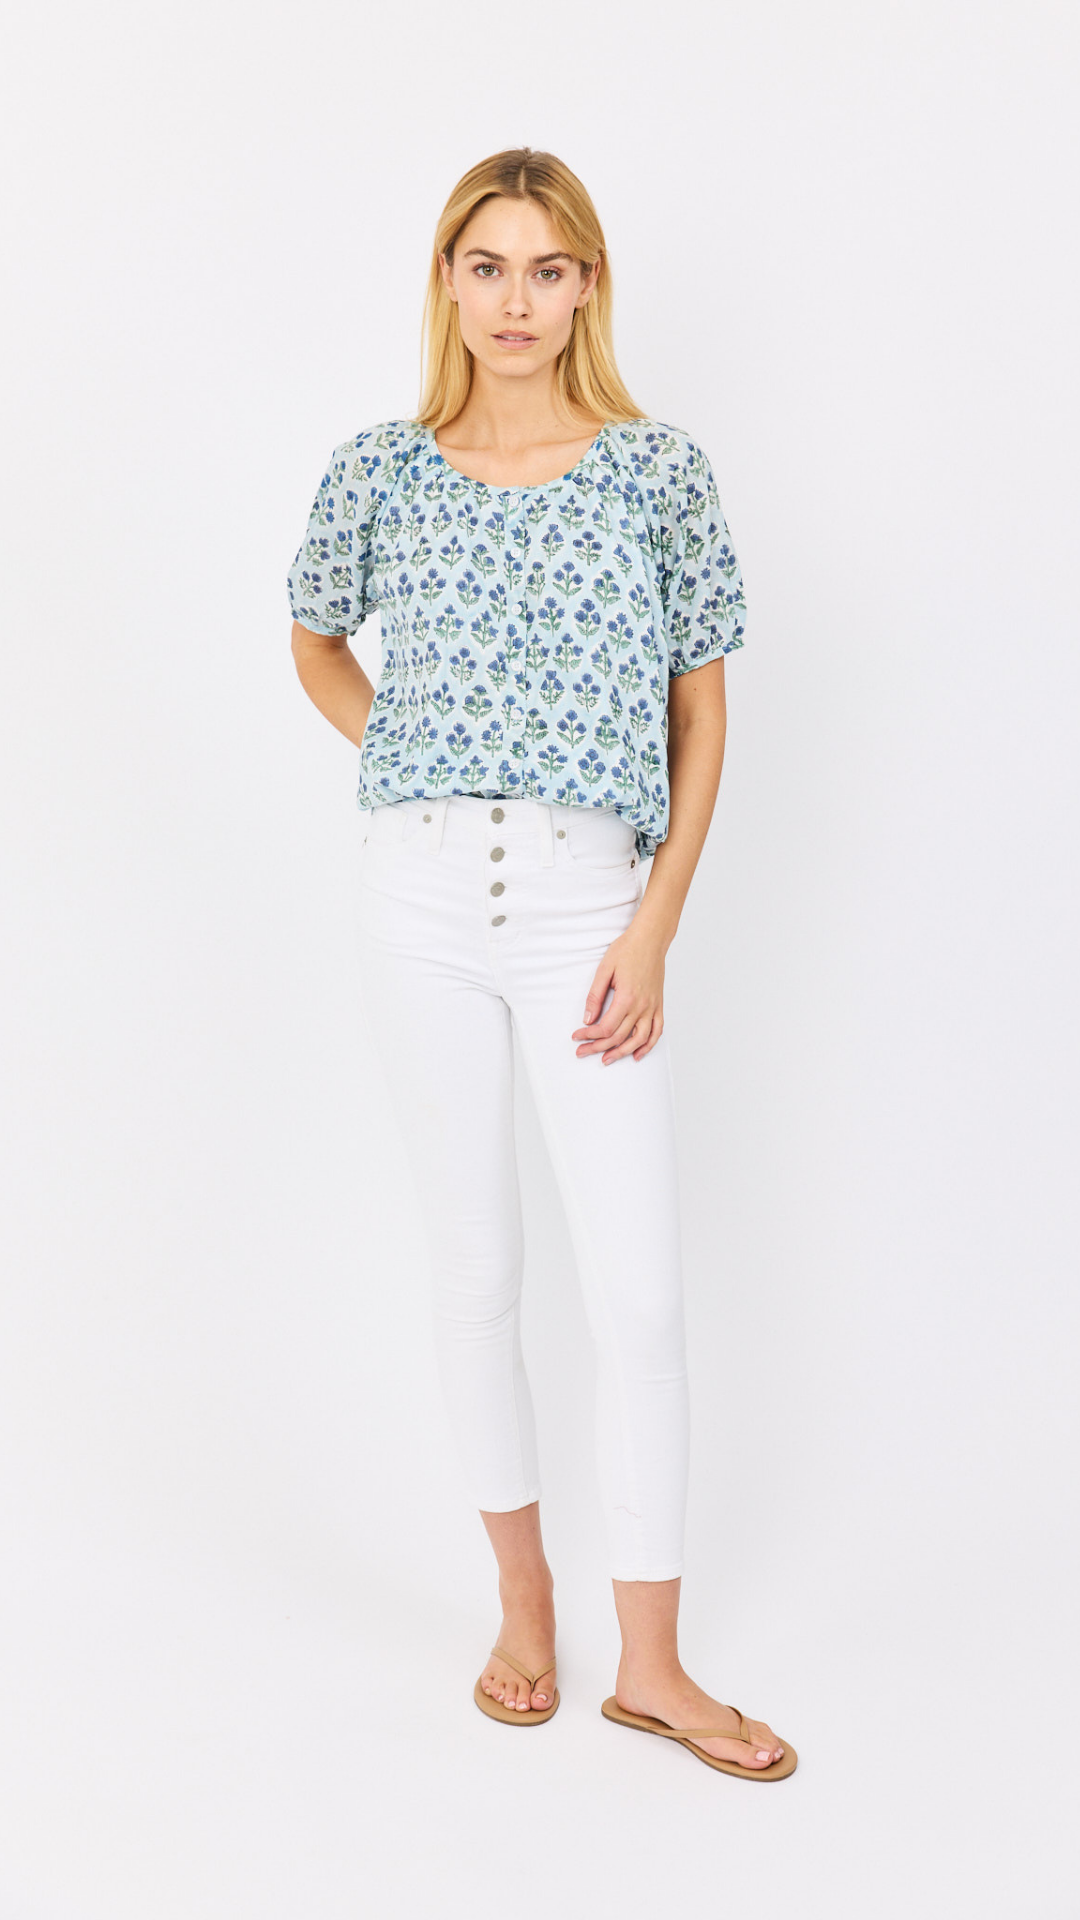 Everly Top - Navy Flower